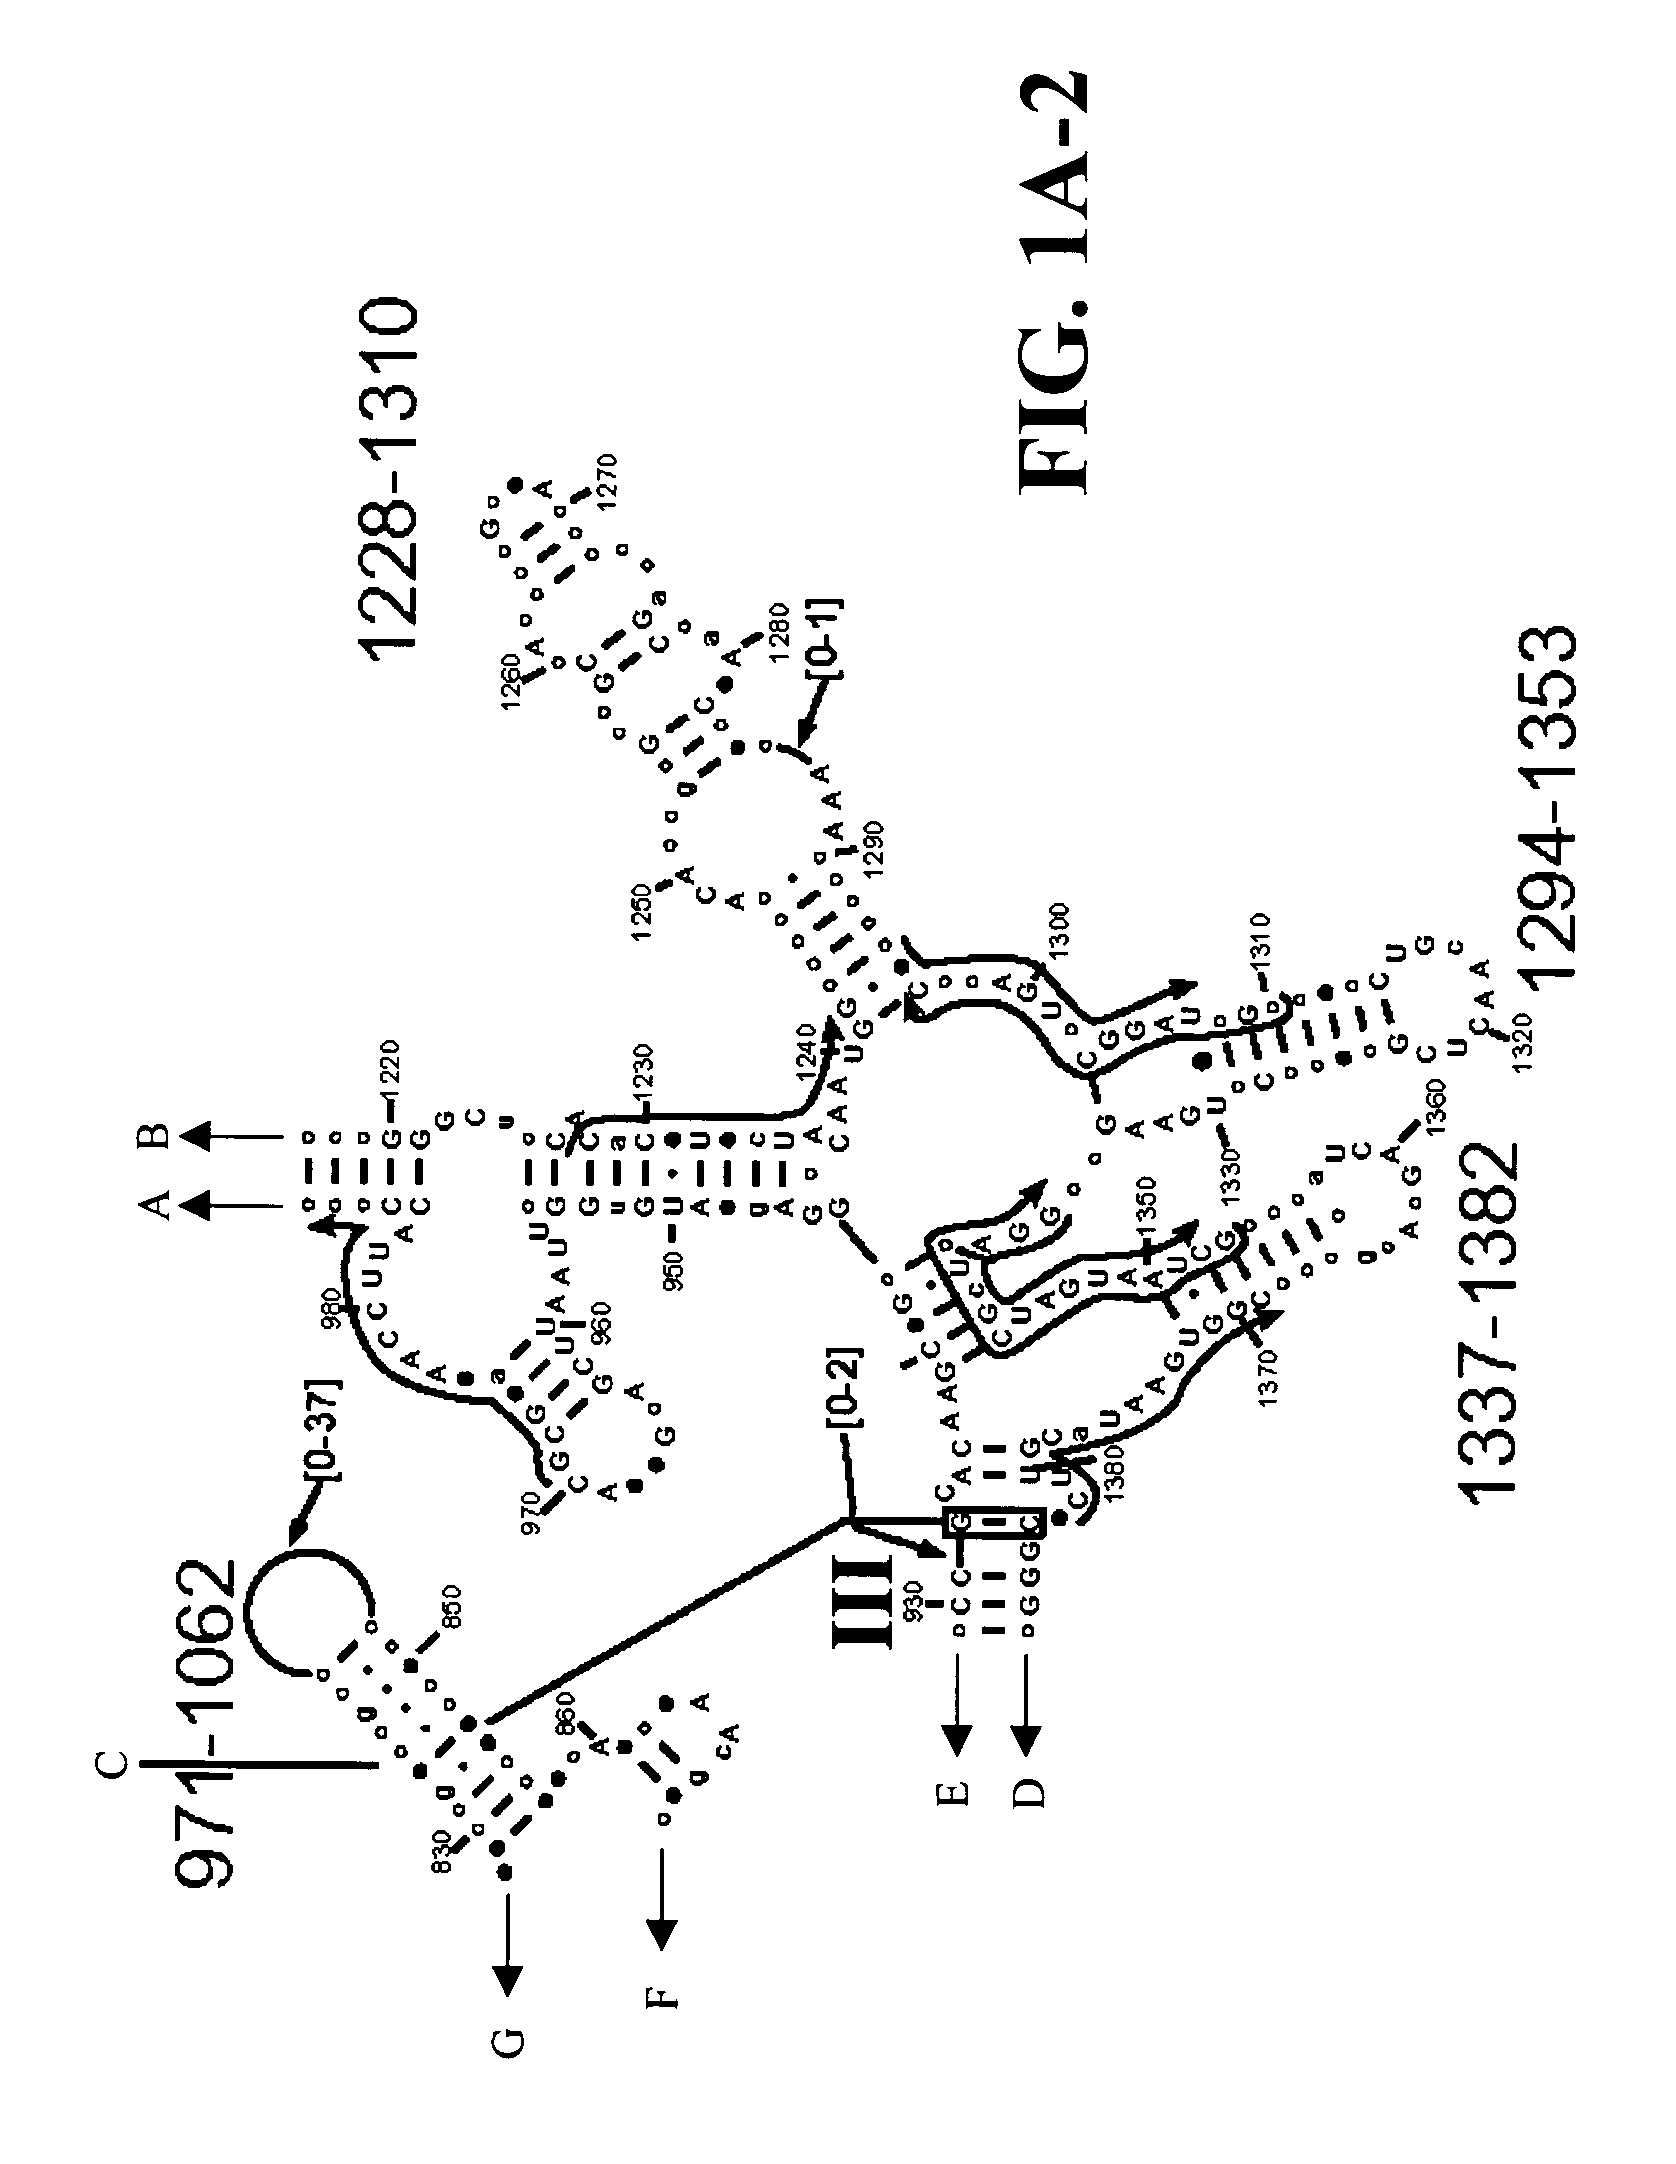 Methods for rapid detection and identification of bioagents for environmental and product testing